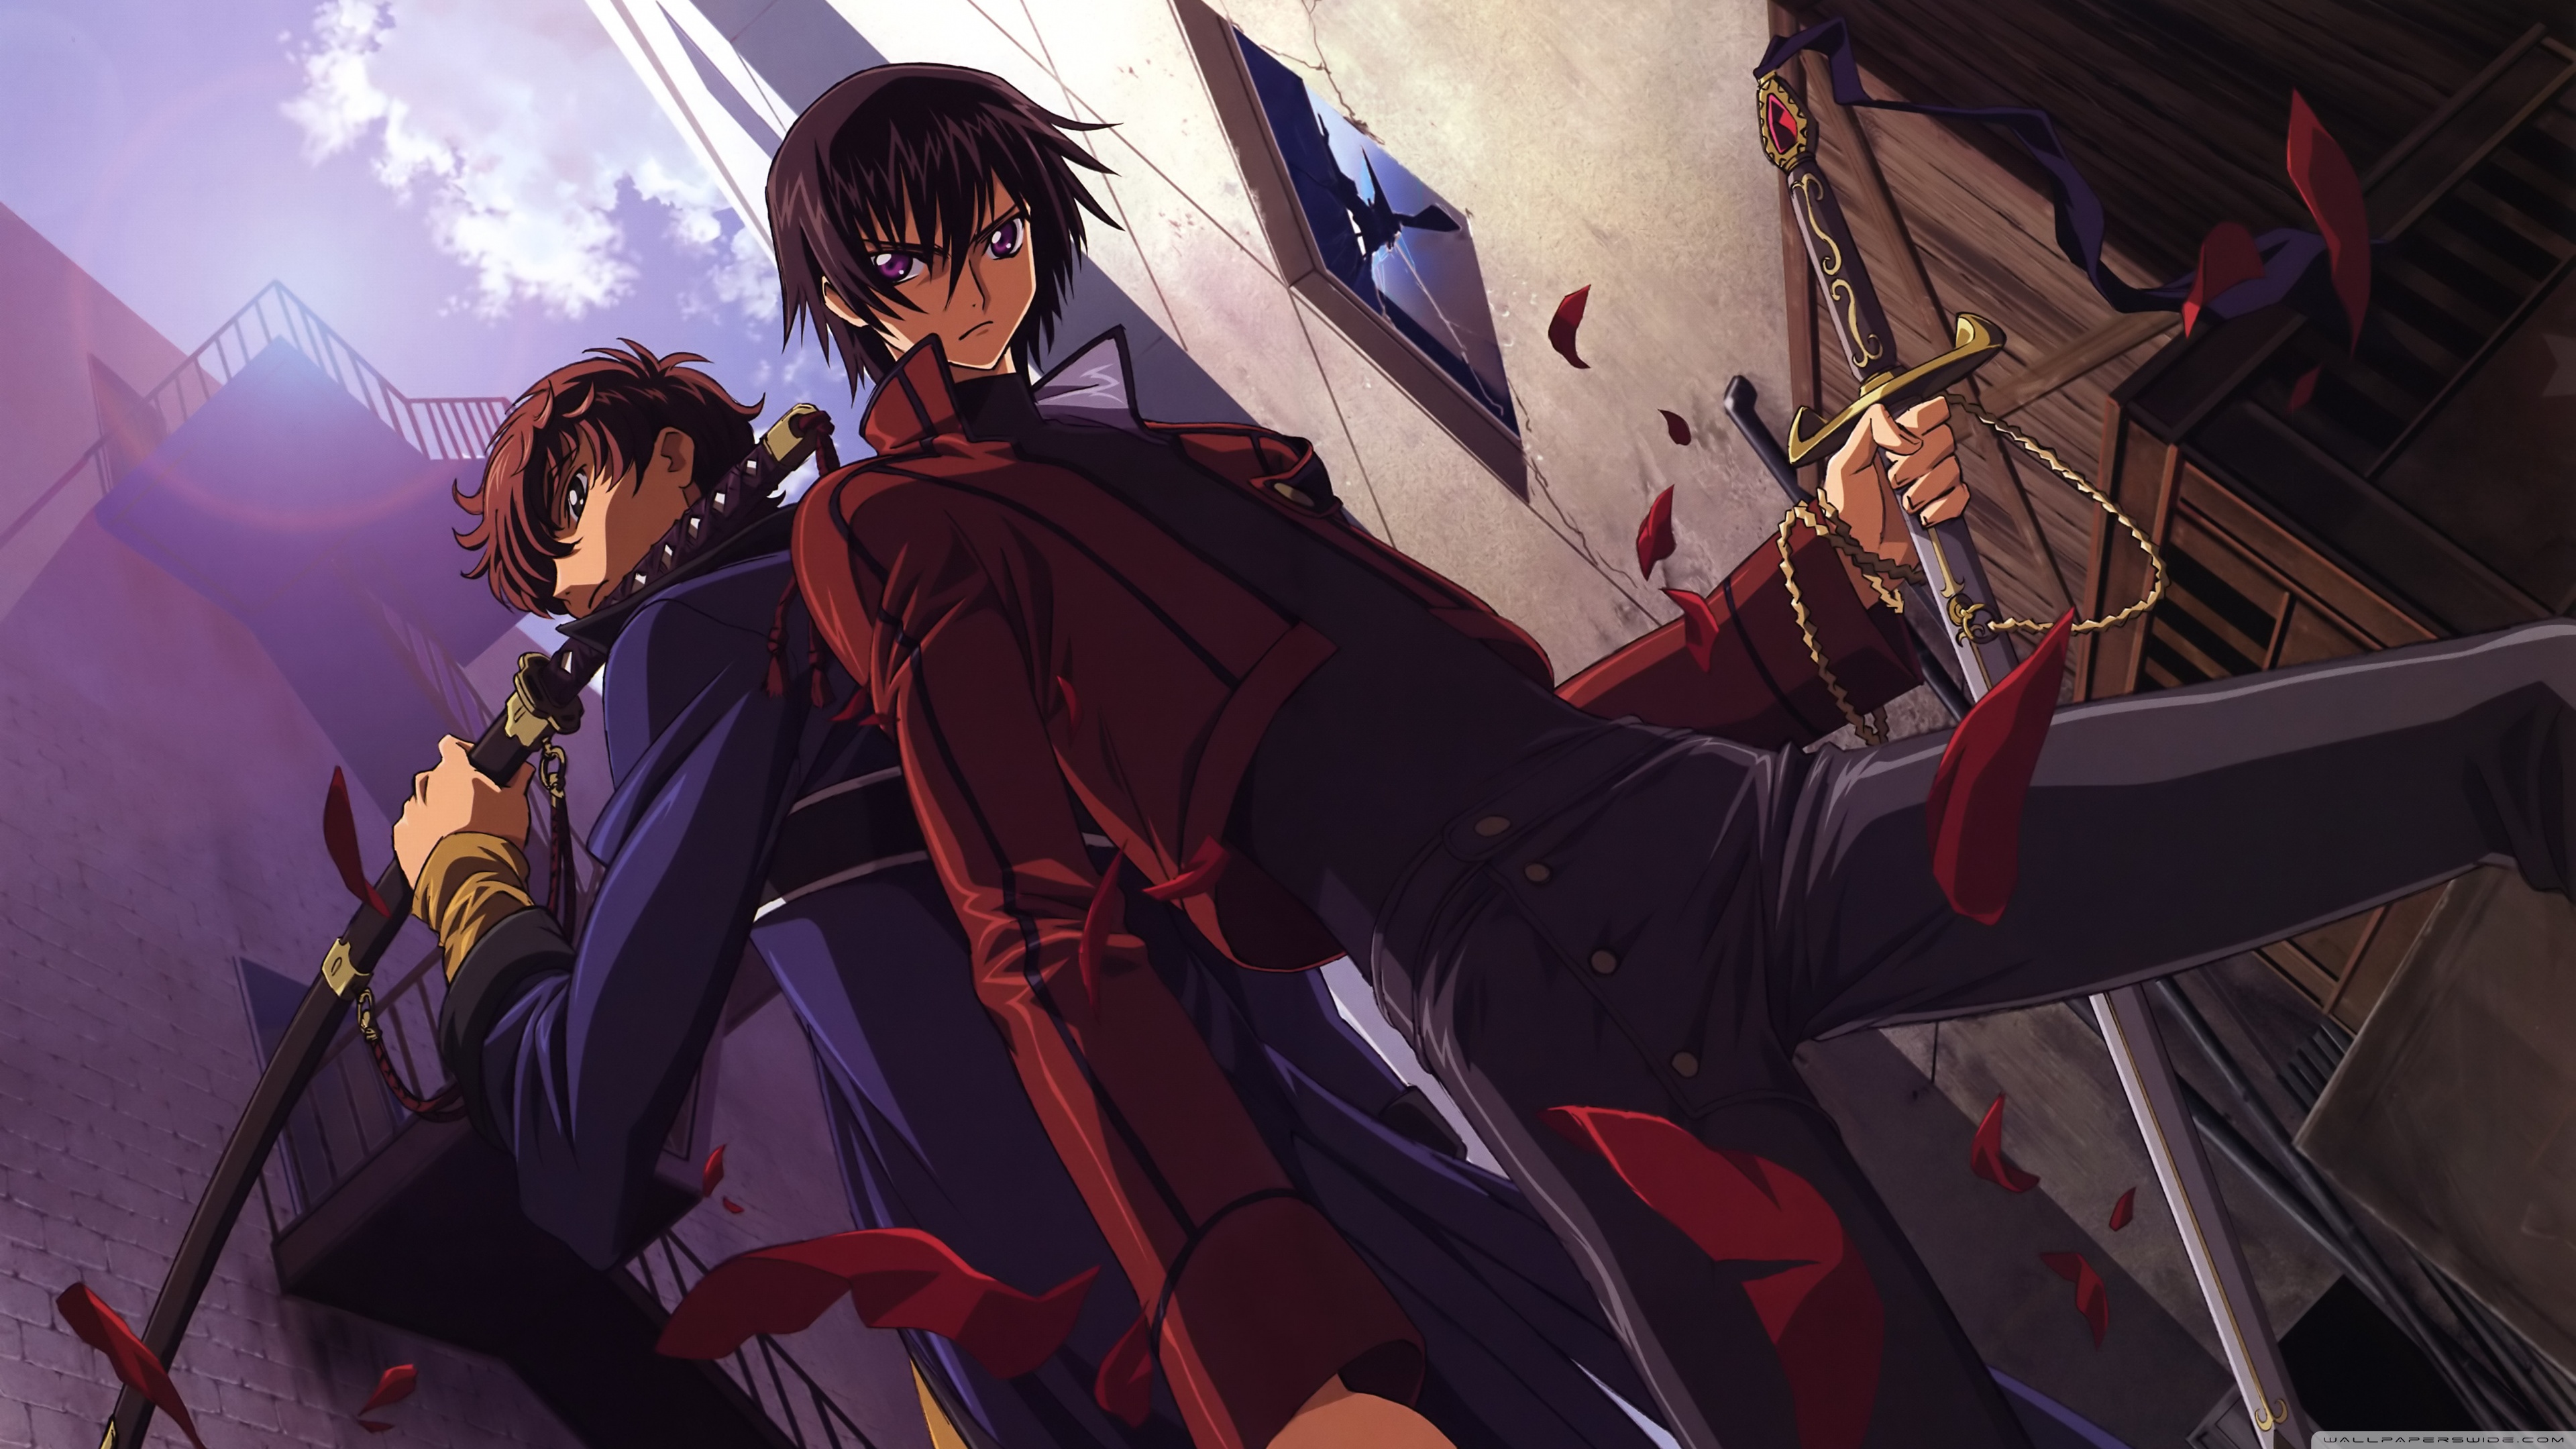 Lelouch - Other & Anime Background Wallpapers on Desktop Nexus